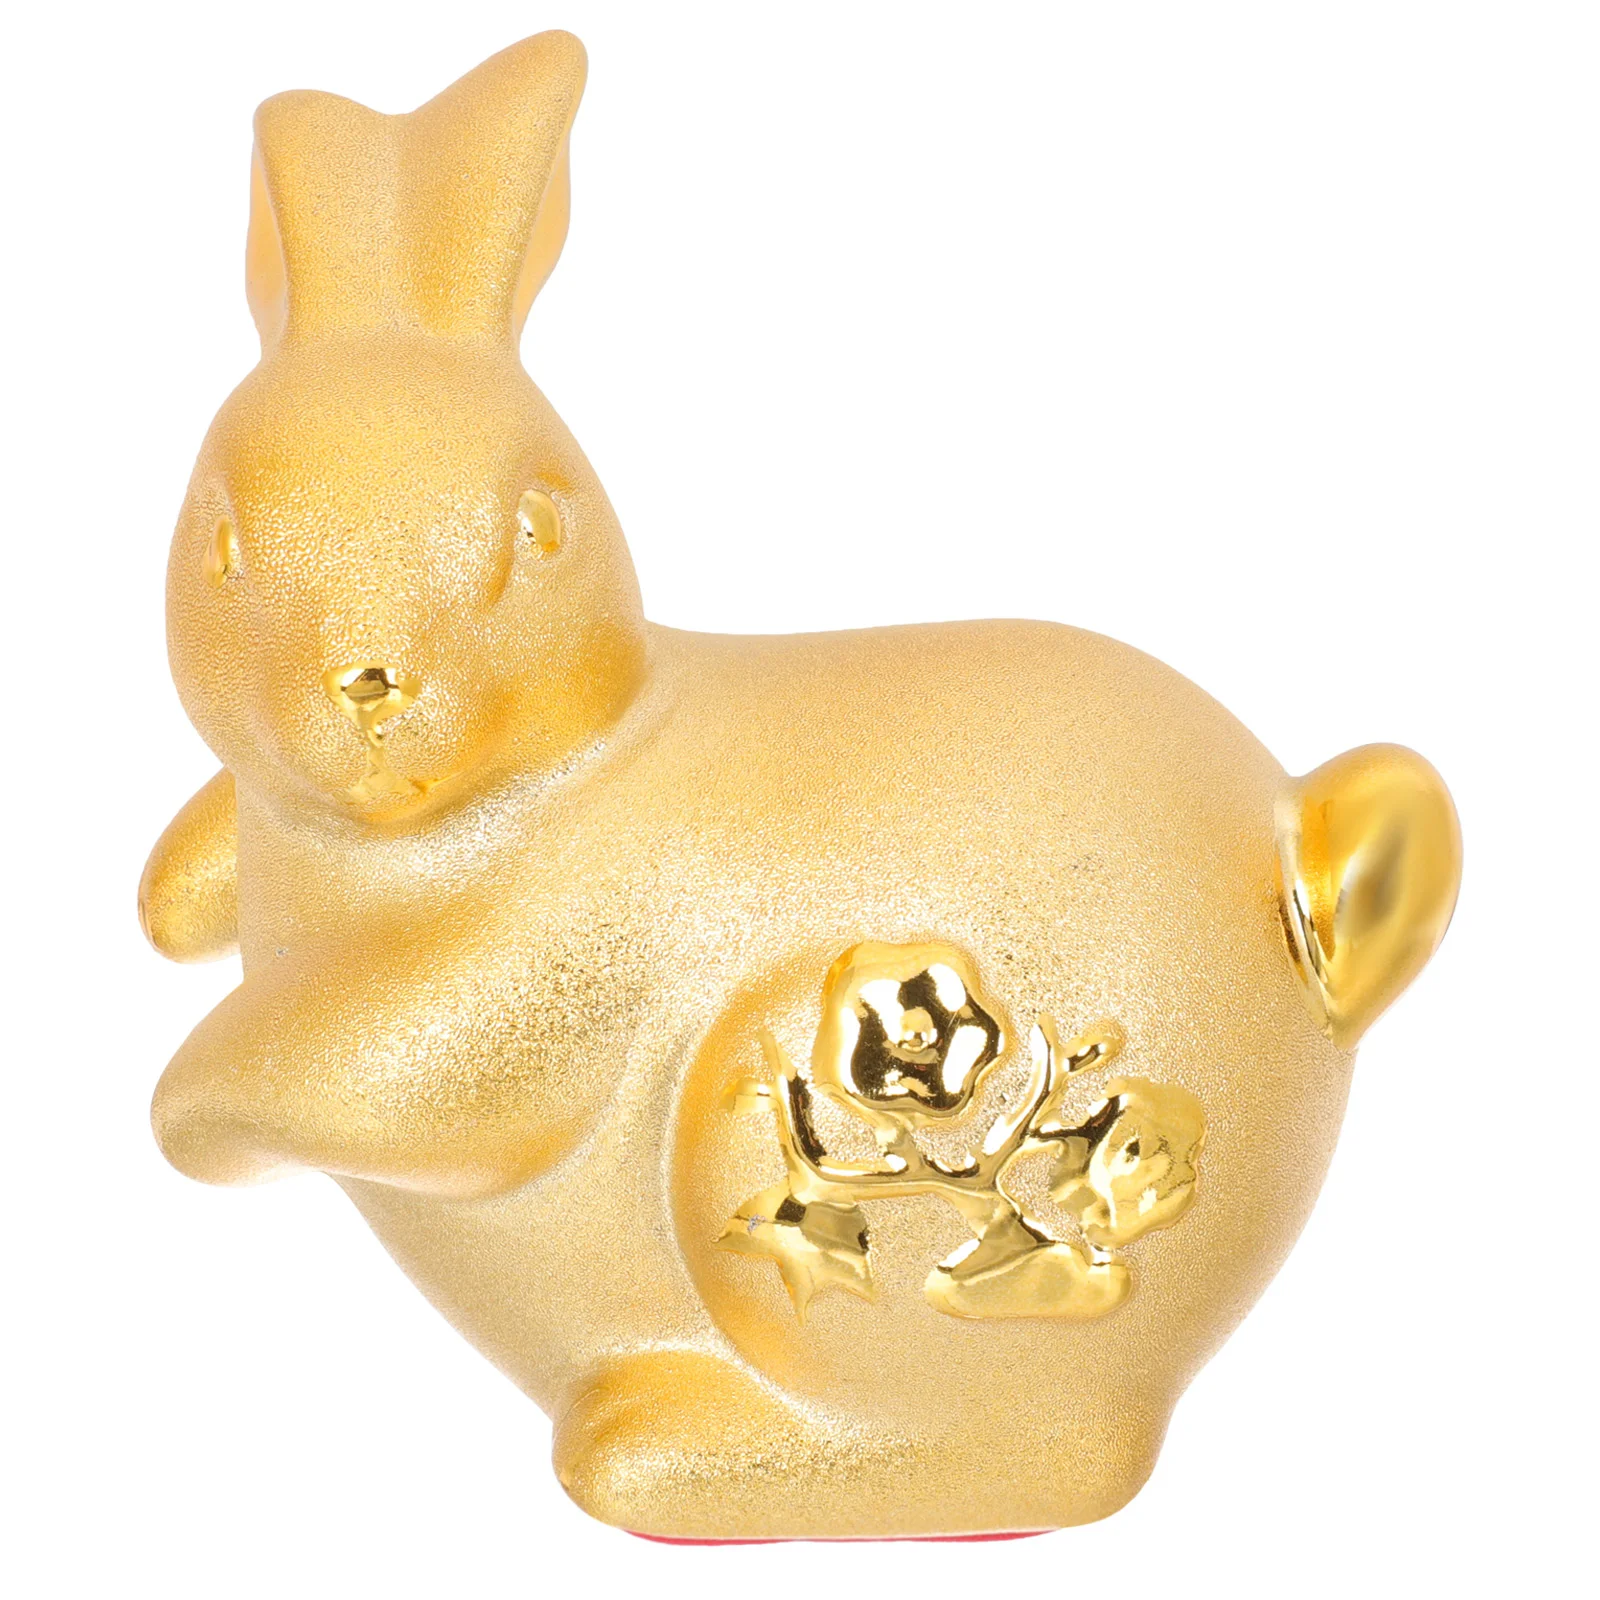 

Rabbit Chinese Statue Year Figurine Bank Zodiac Bunny Piggy Decor Figurines Animal New Shui Feng Ornament Lucky Figures Thecoin